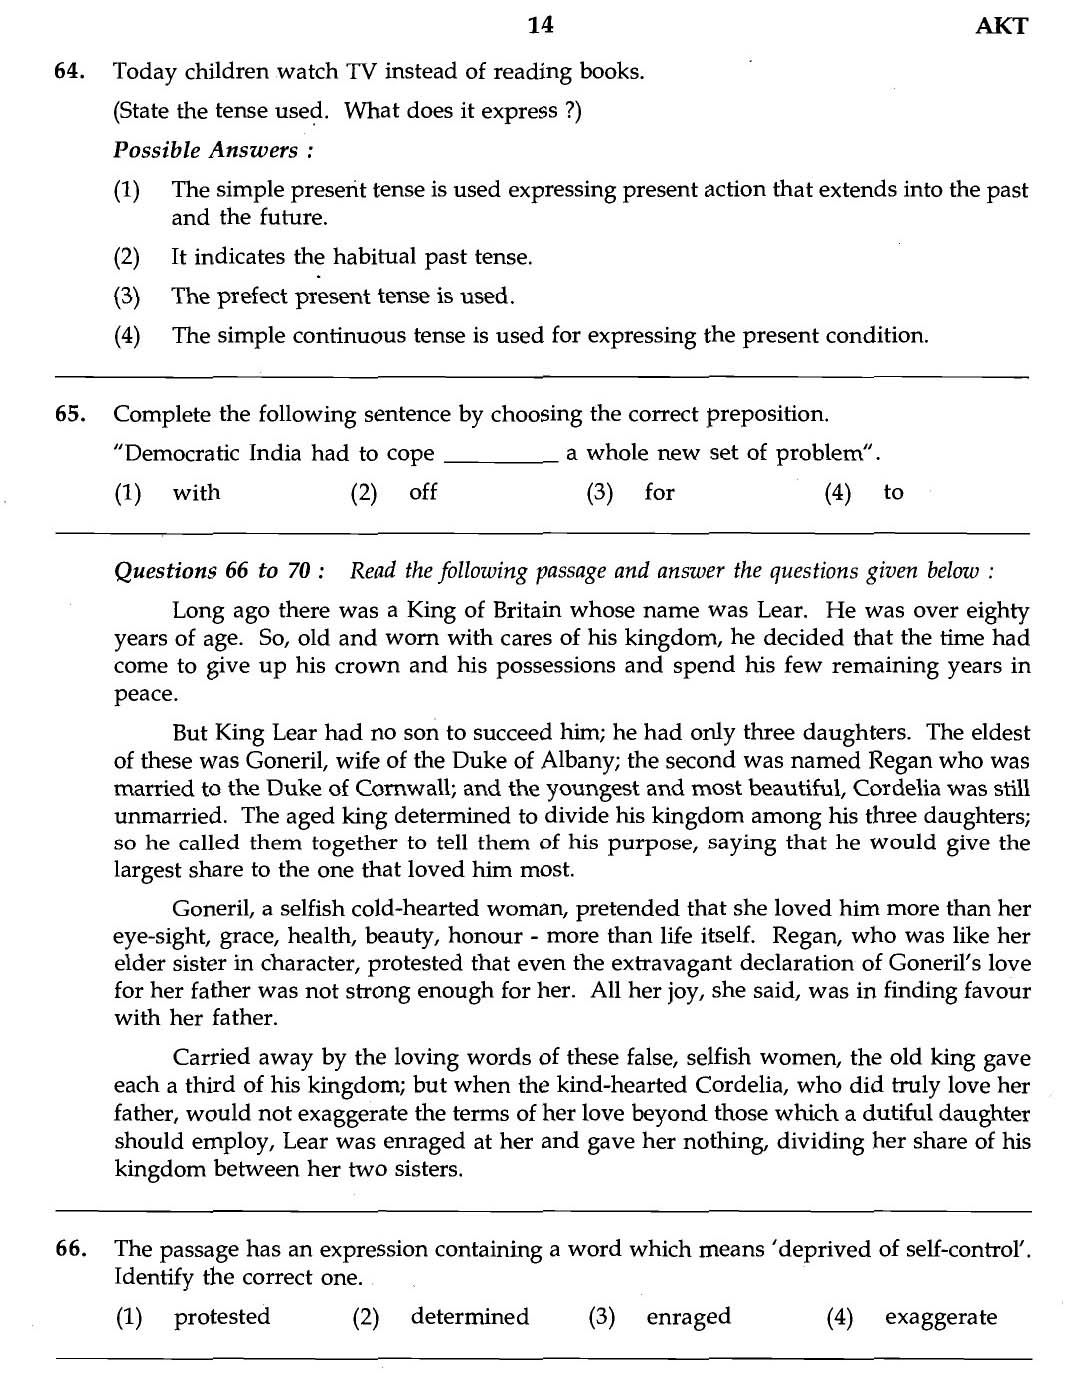 MPSC Agricultural Services Exam 2007 General Question Paper 12